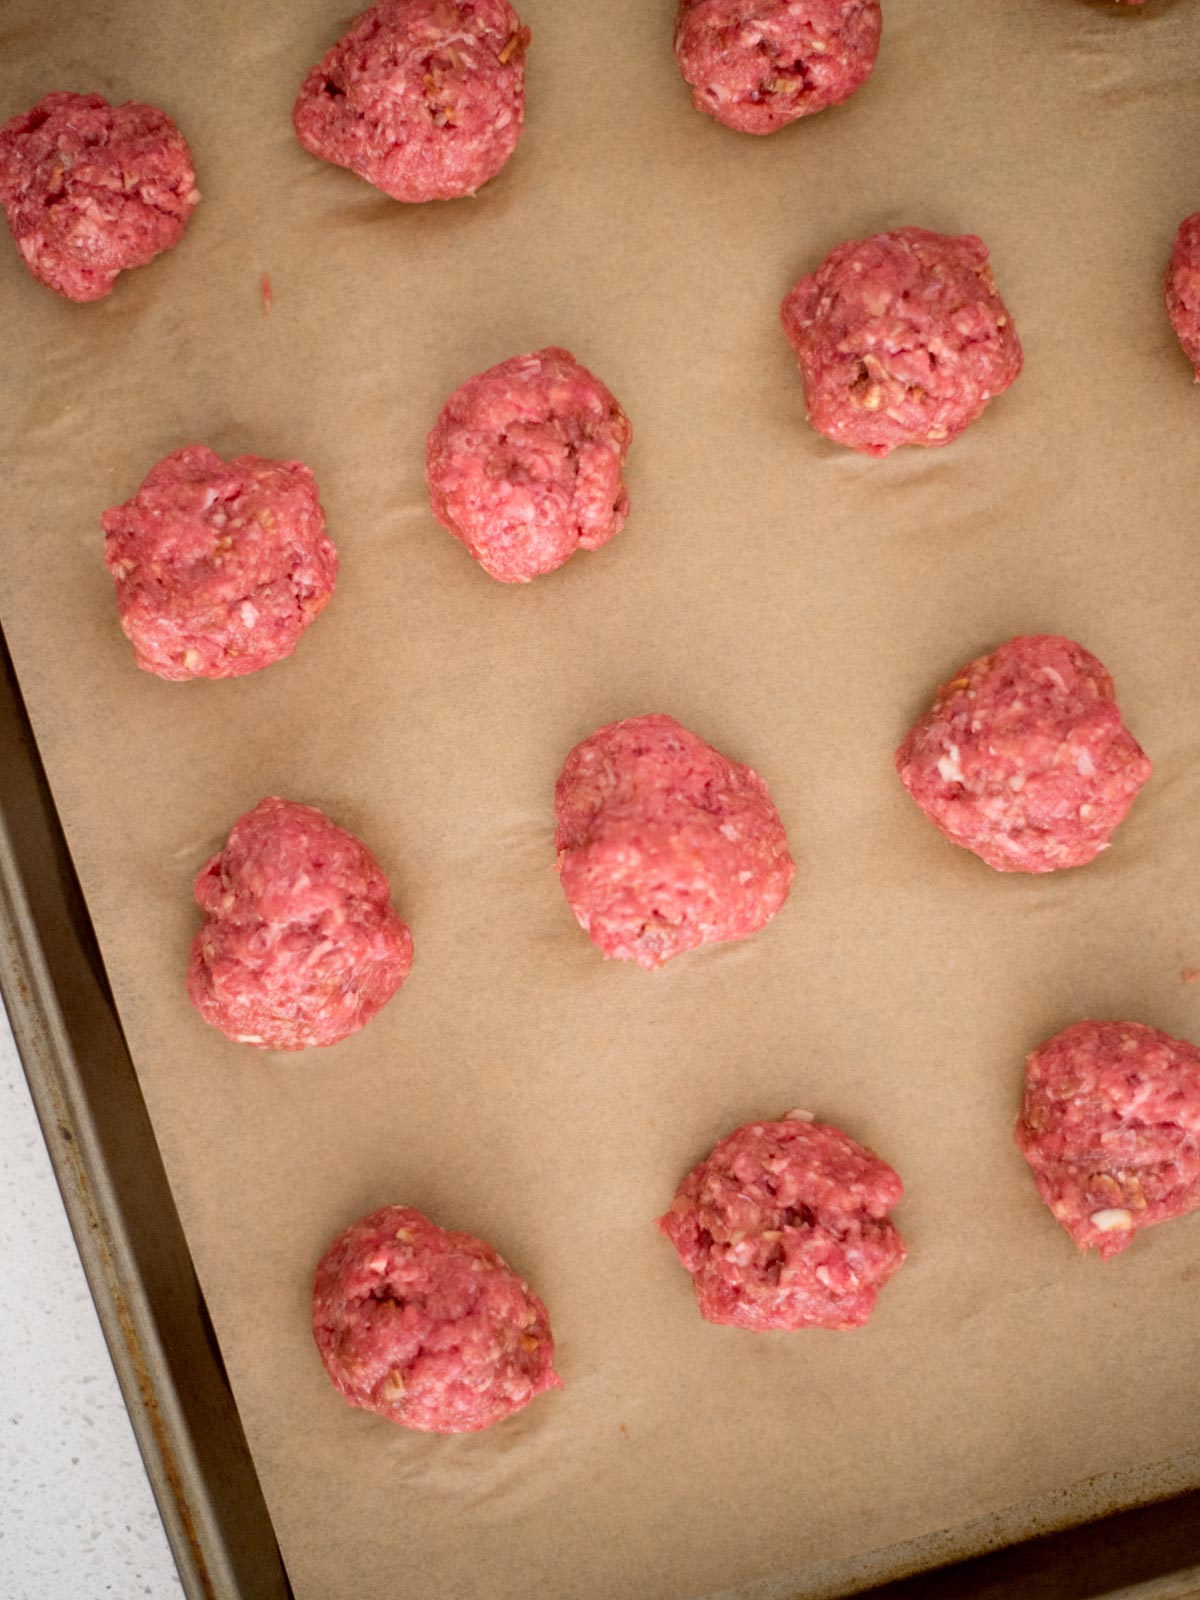 meatballs formed into smooth balls on a parchment lined baking sheet